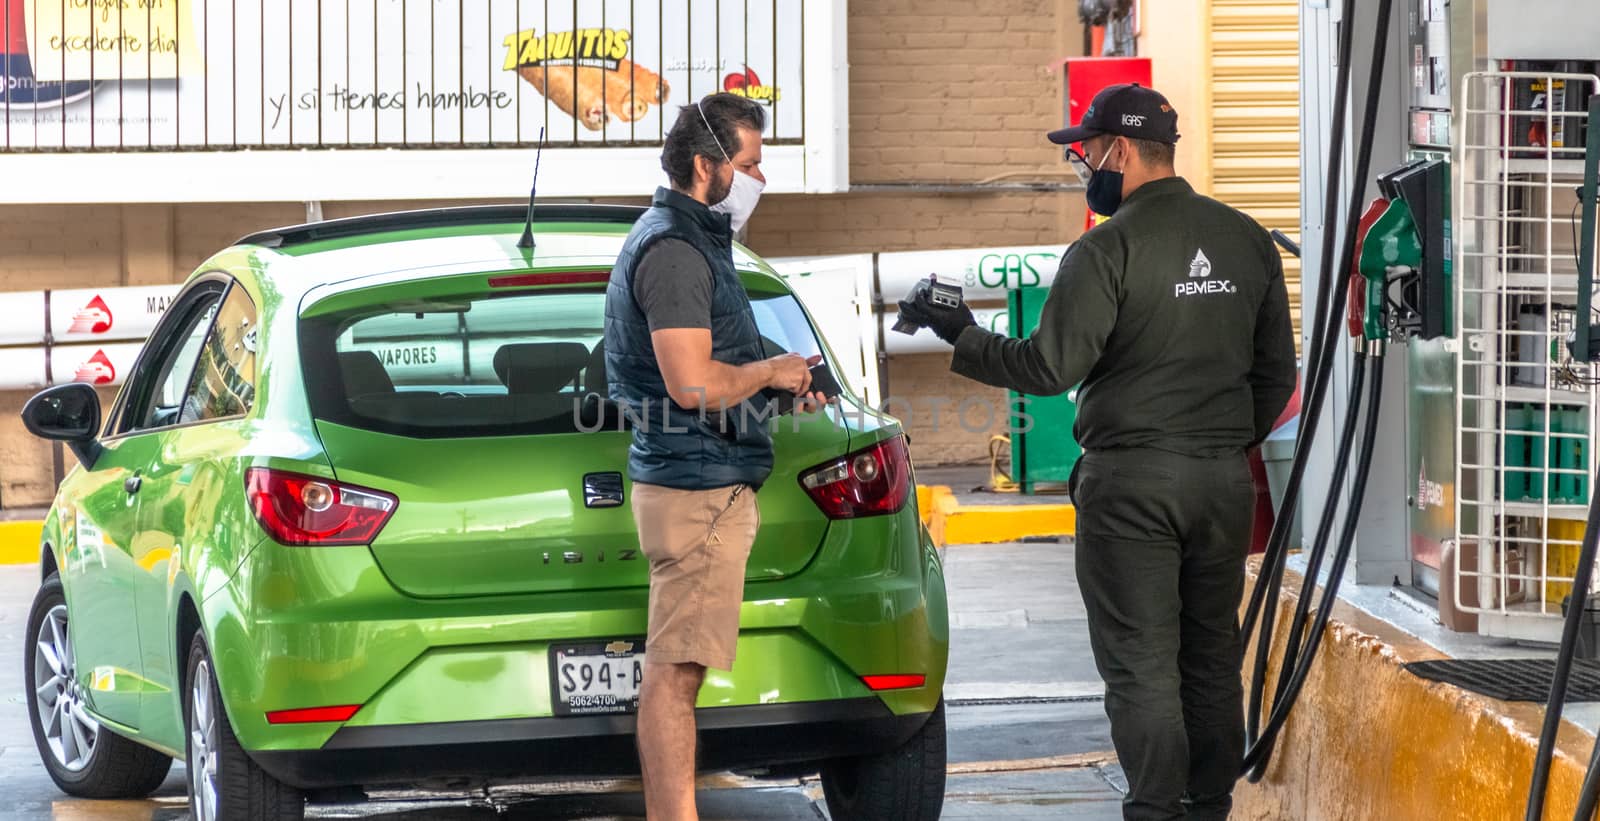 La Mexicana, Santa Fe, Mexico City: June 9, 2020. Gas station employee charging a user for a credit card. mouth covers